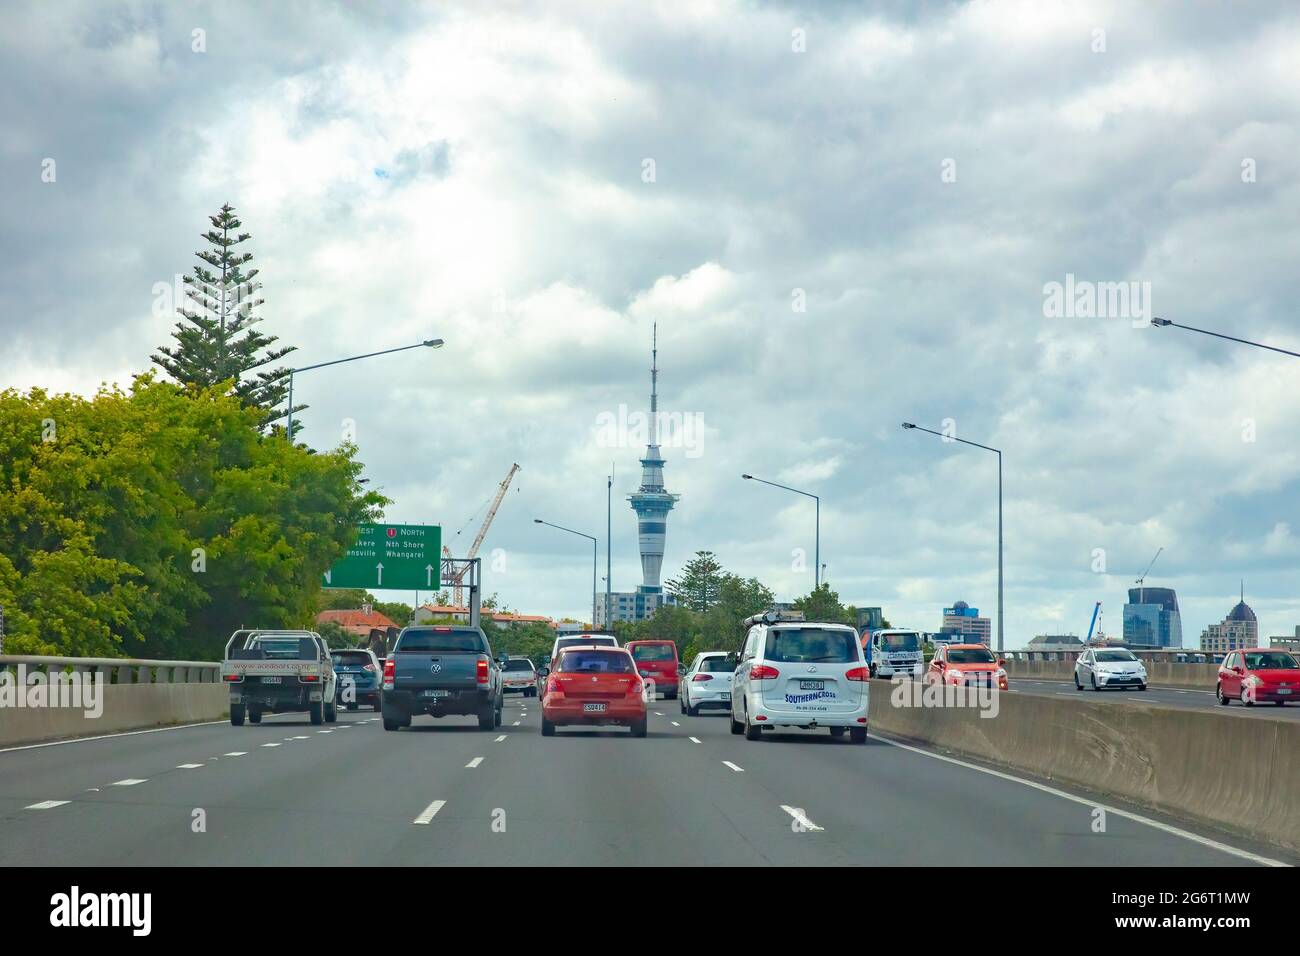 Auckland cbd with Sky Tower view taken from Auckland Southern Motorway, New Zealand on December 9, 2019 Stock Photo